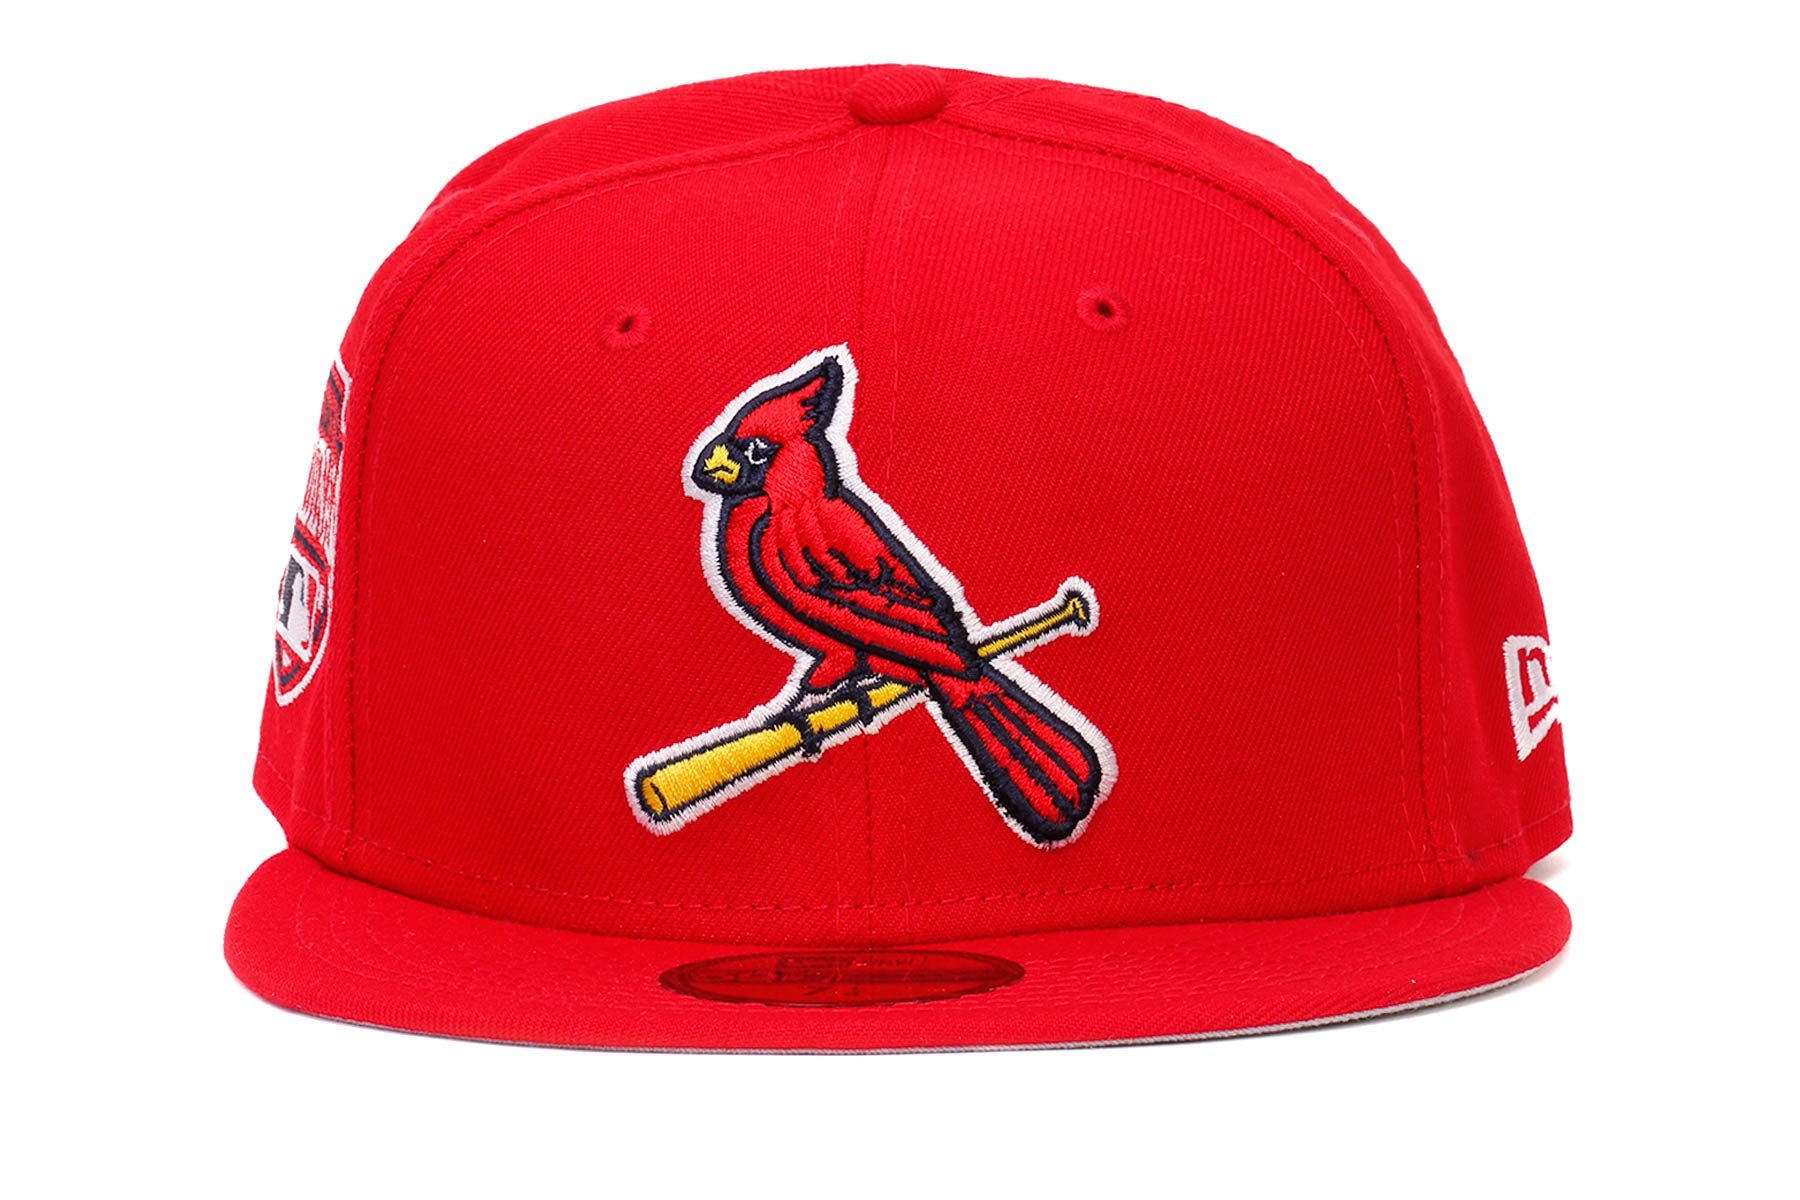 st louis cardinals fitted hat